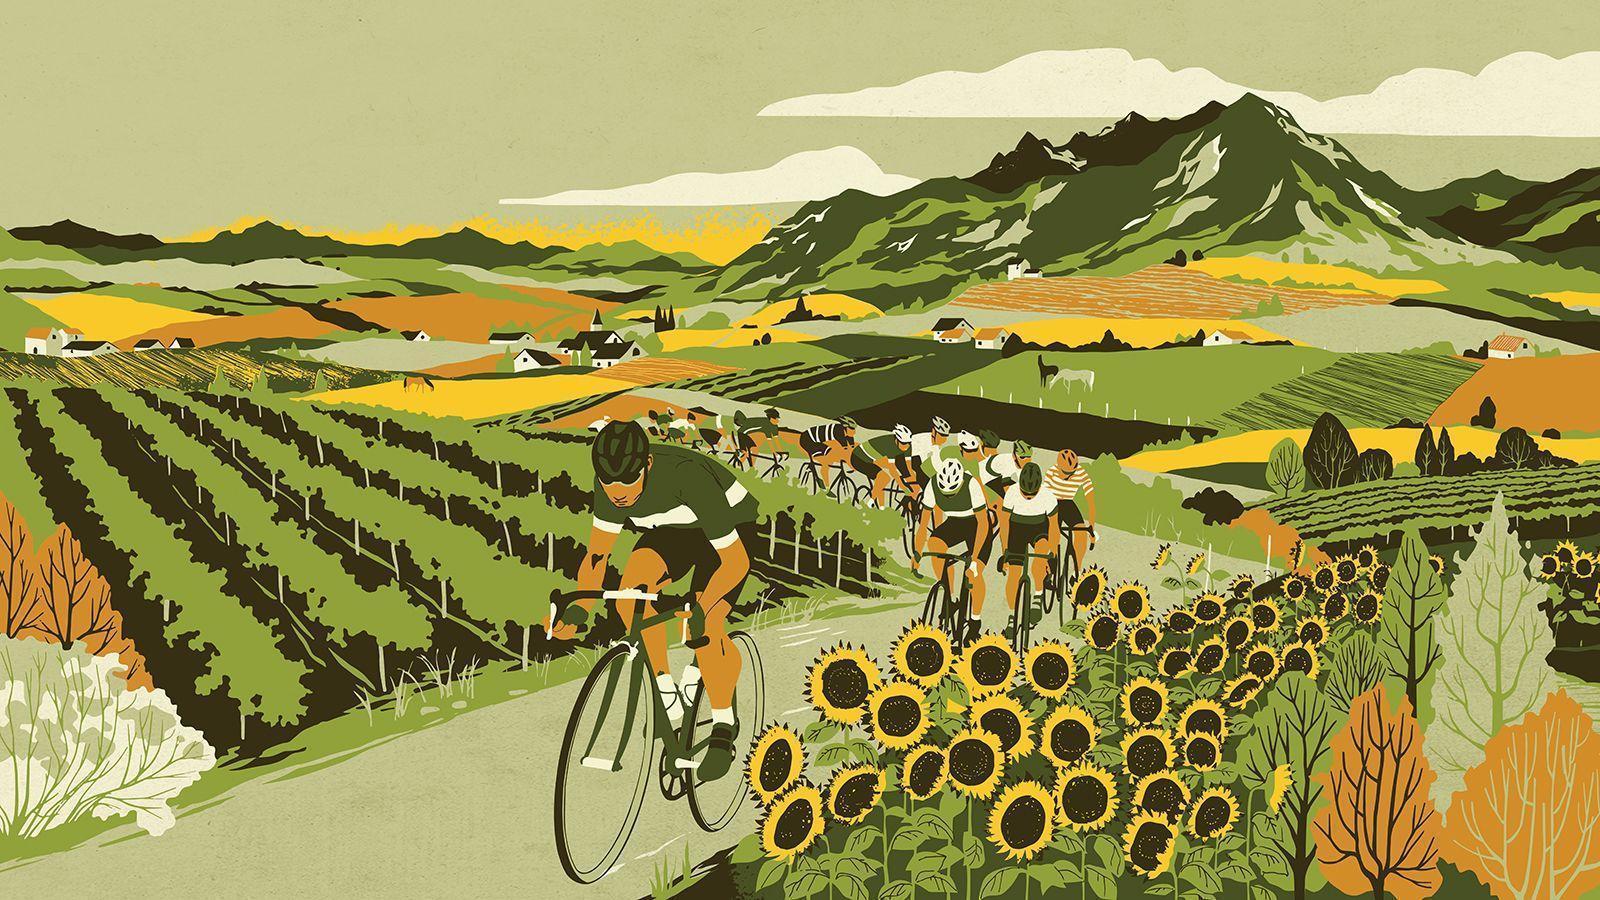 Unfiltered: Bicicleta Wine Takes the Stage at the Tour de France